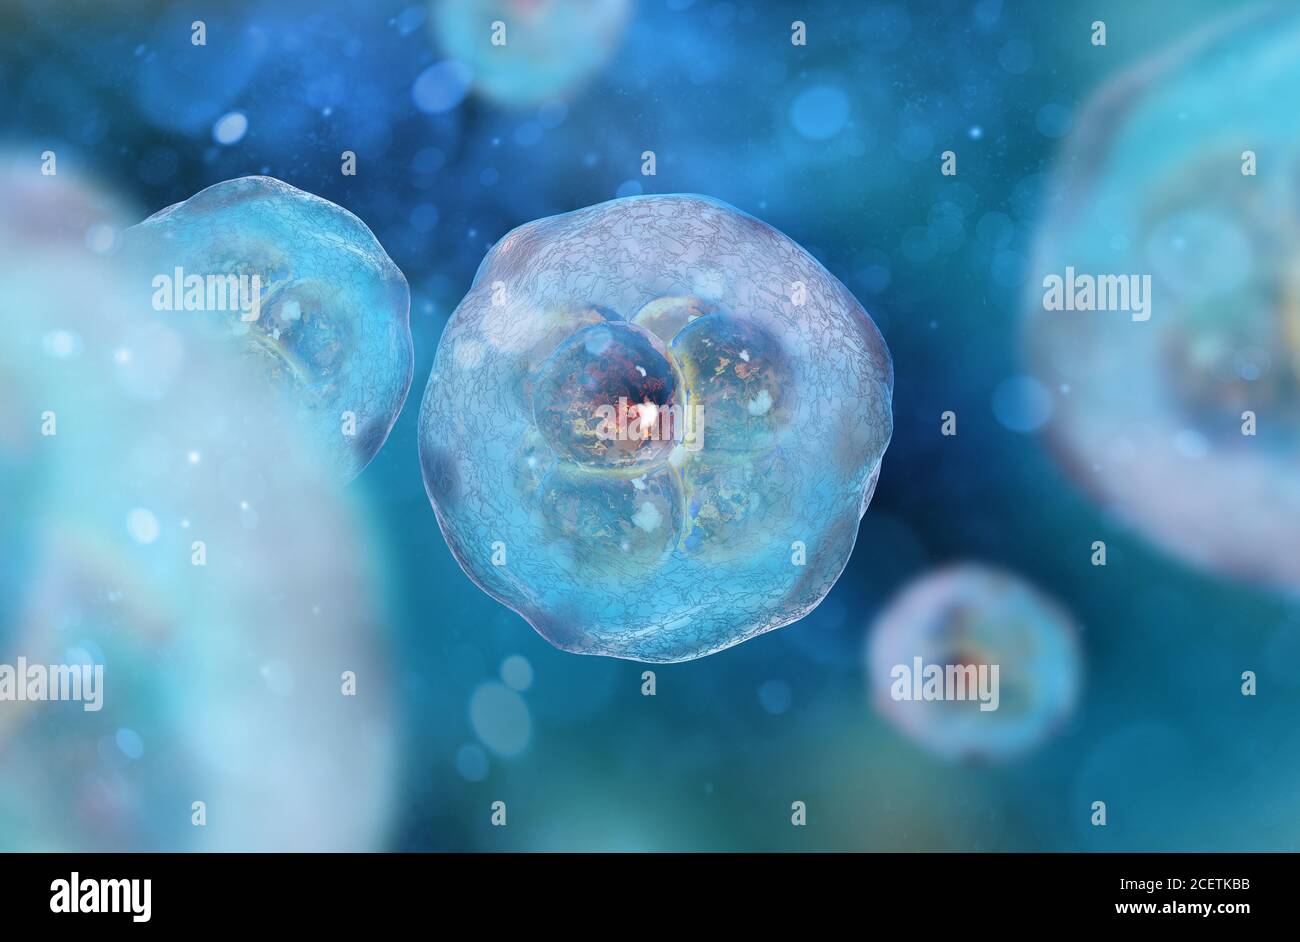 Cells under a microscope. Stem cell research. Cell therapy. Cell division. 3d illustration Stock Photo